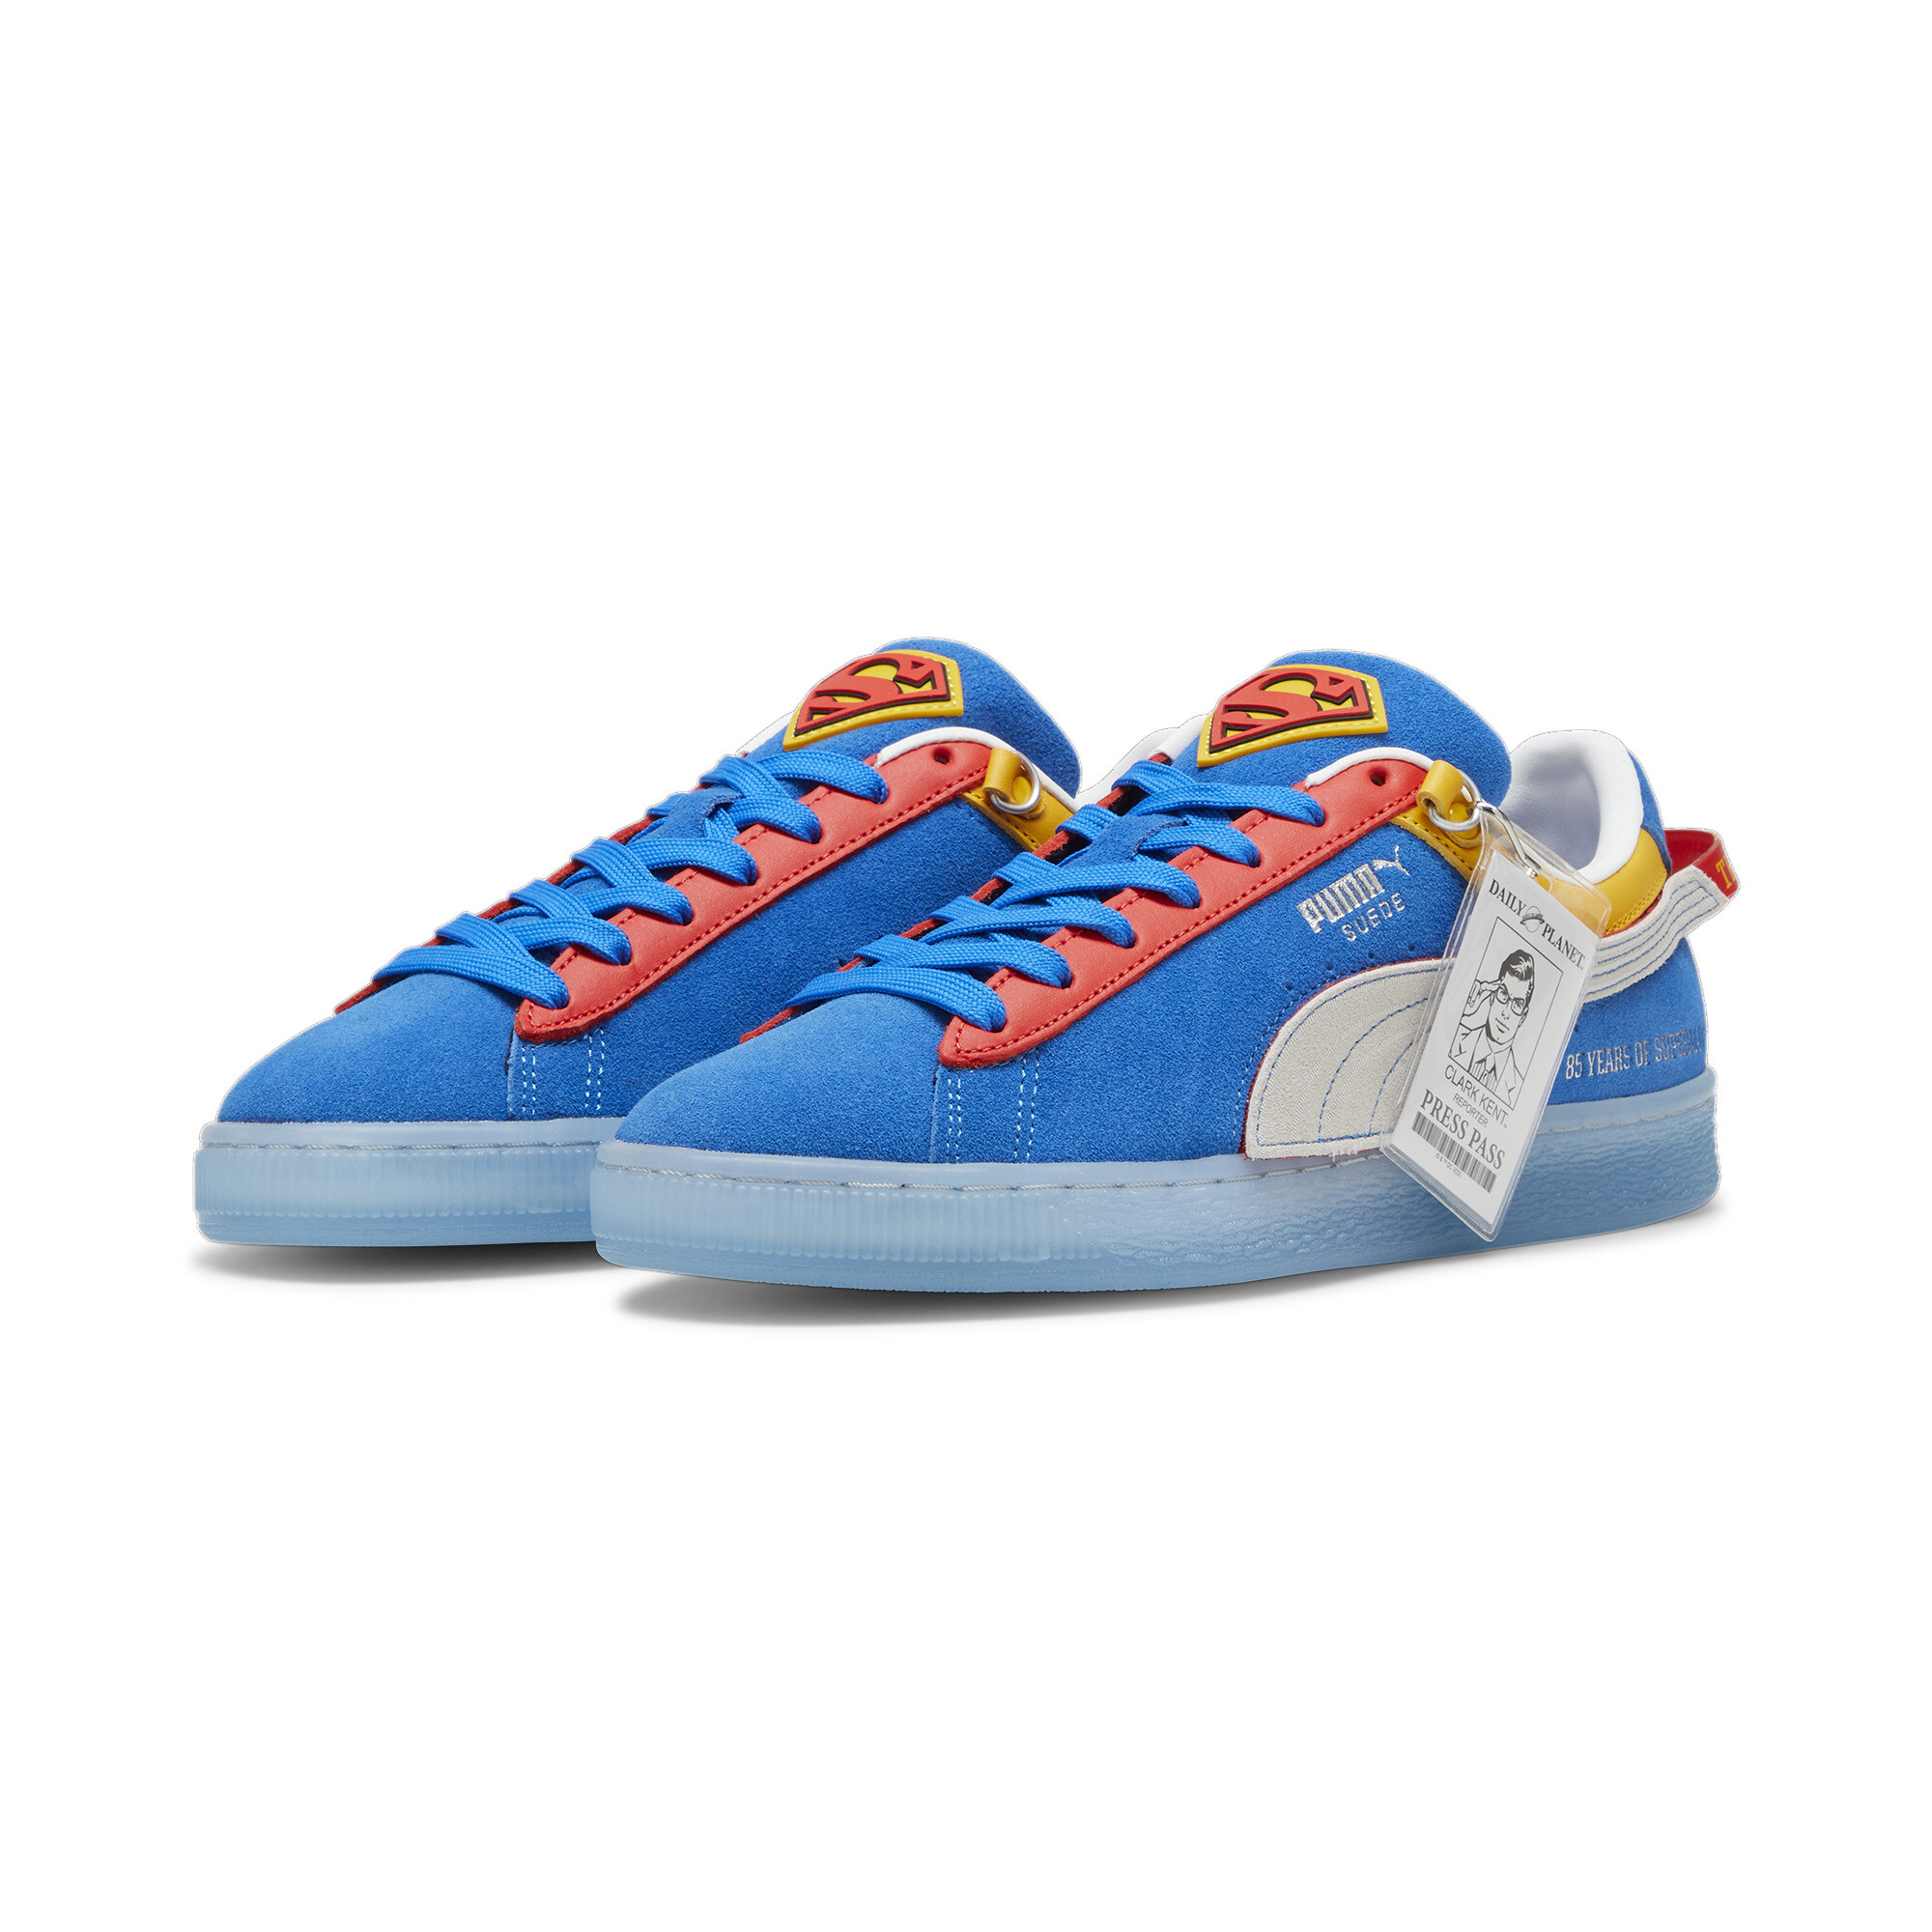 Puma X SUPERMAN 85th Anniversary Suede Sneakers, Blue, Size 38.5, Shoes